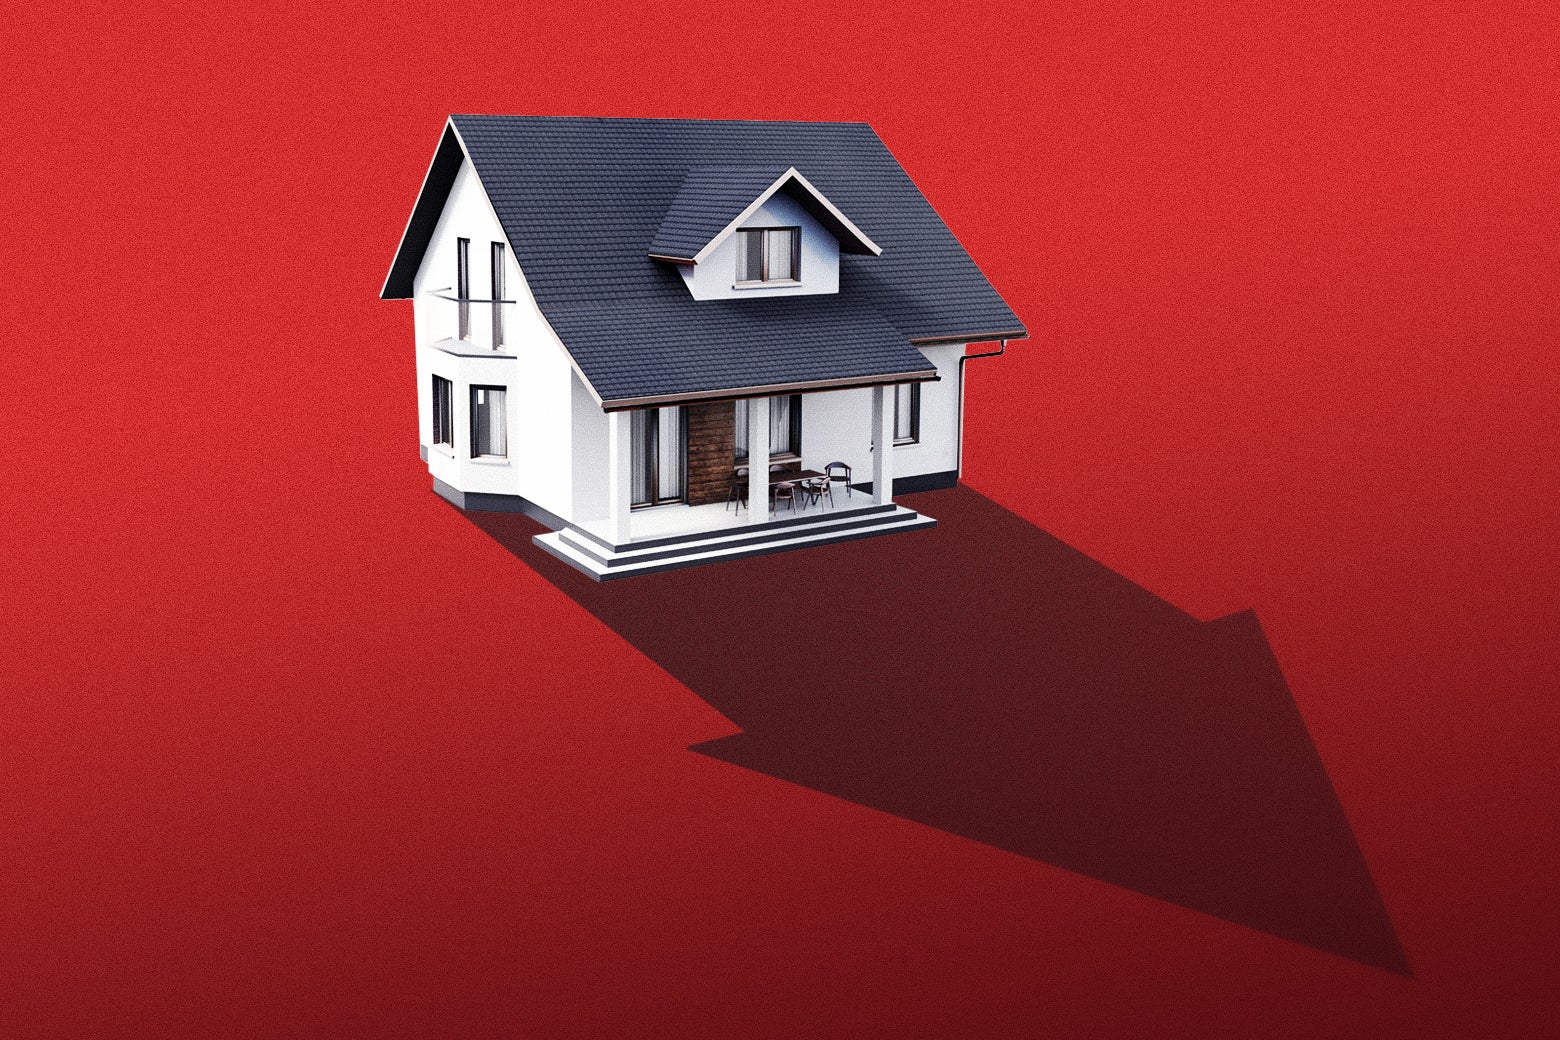 House on a red background casting a downward arrow shadow.